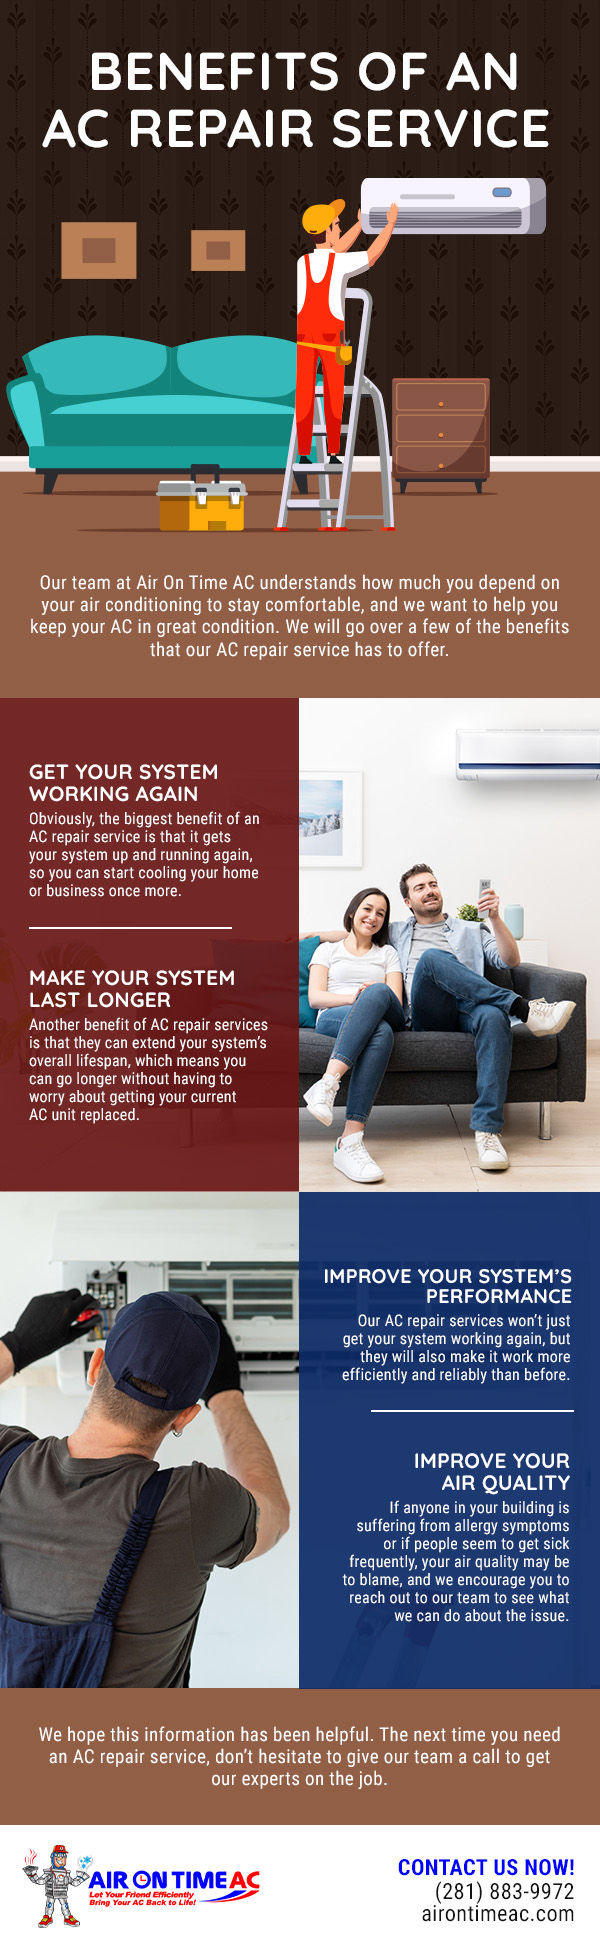 Benefits of an AC Repair Service [infographic]